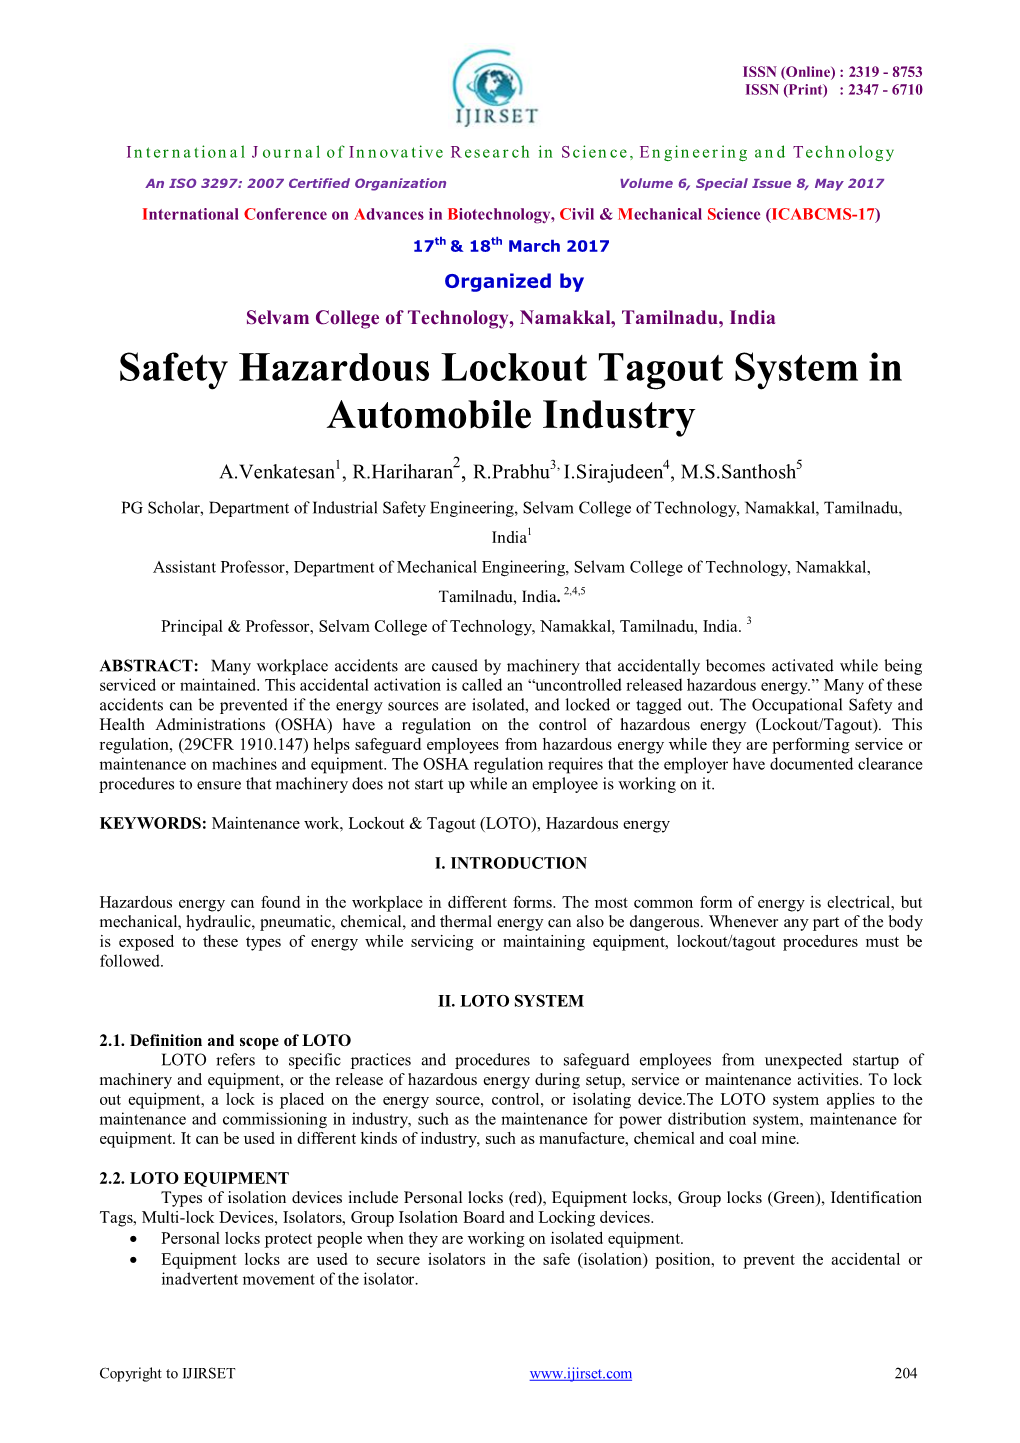 Safety Hazardous Lockout Tagout System in Automobile Industry